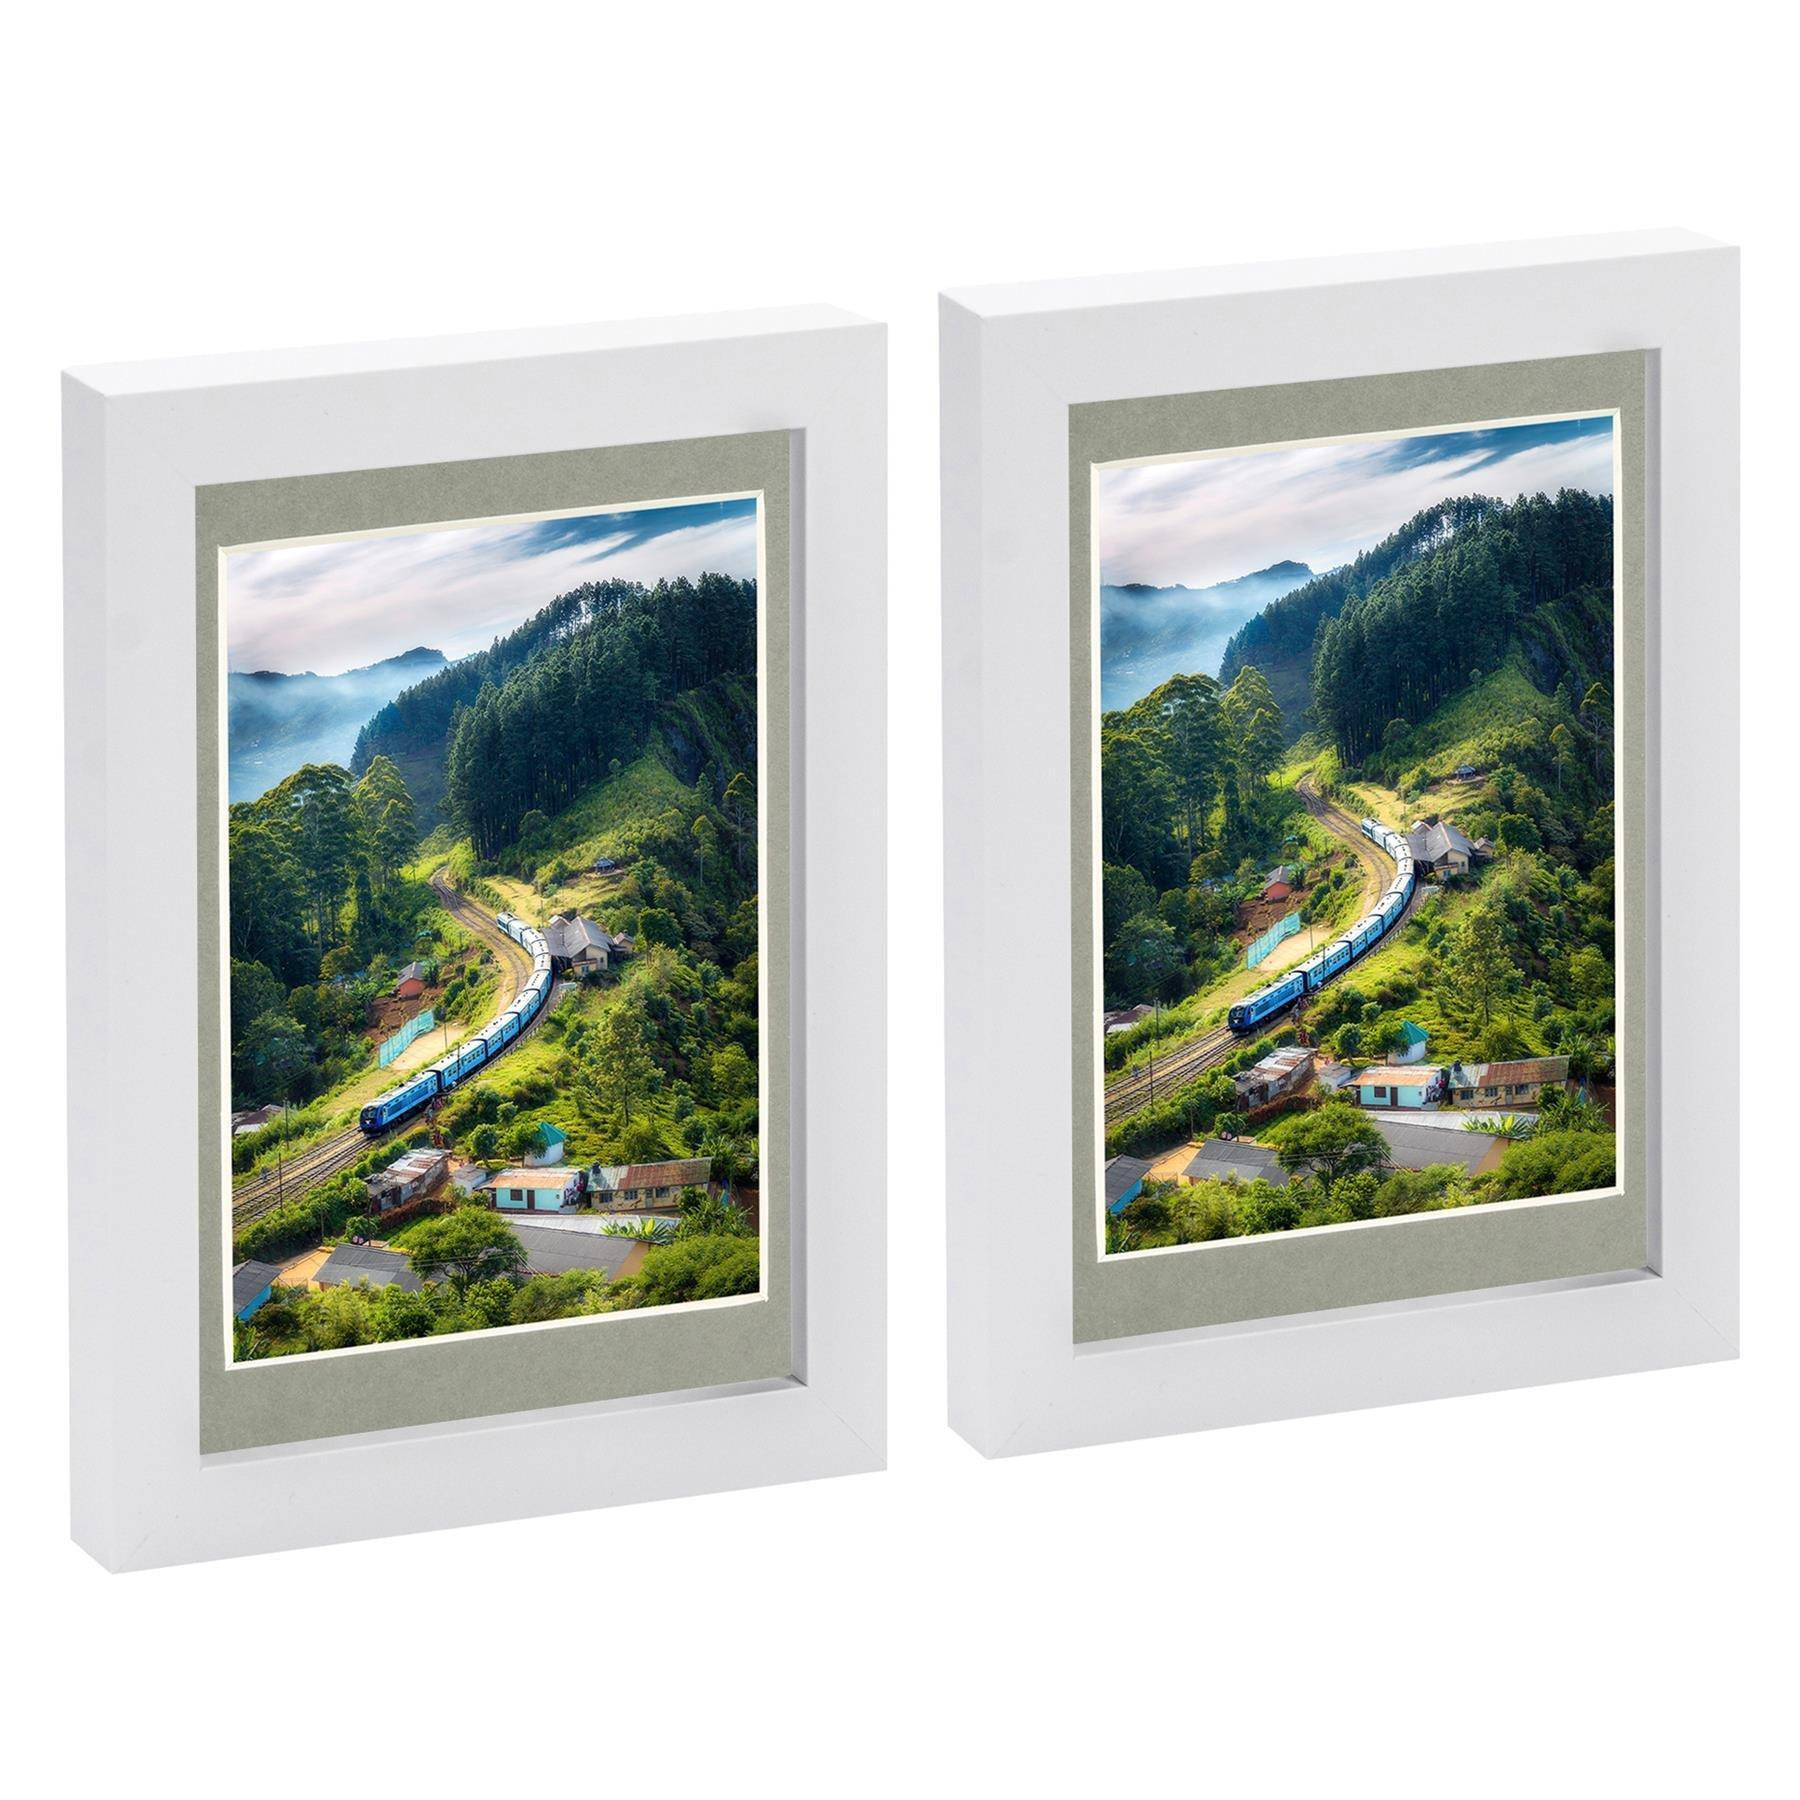 "Photo Frames with 4"" x 6"" Mount - 5"" x 7"" - White - Pack of 2" - image 1